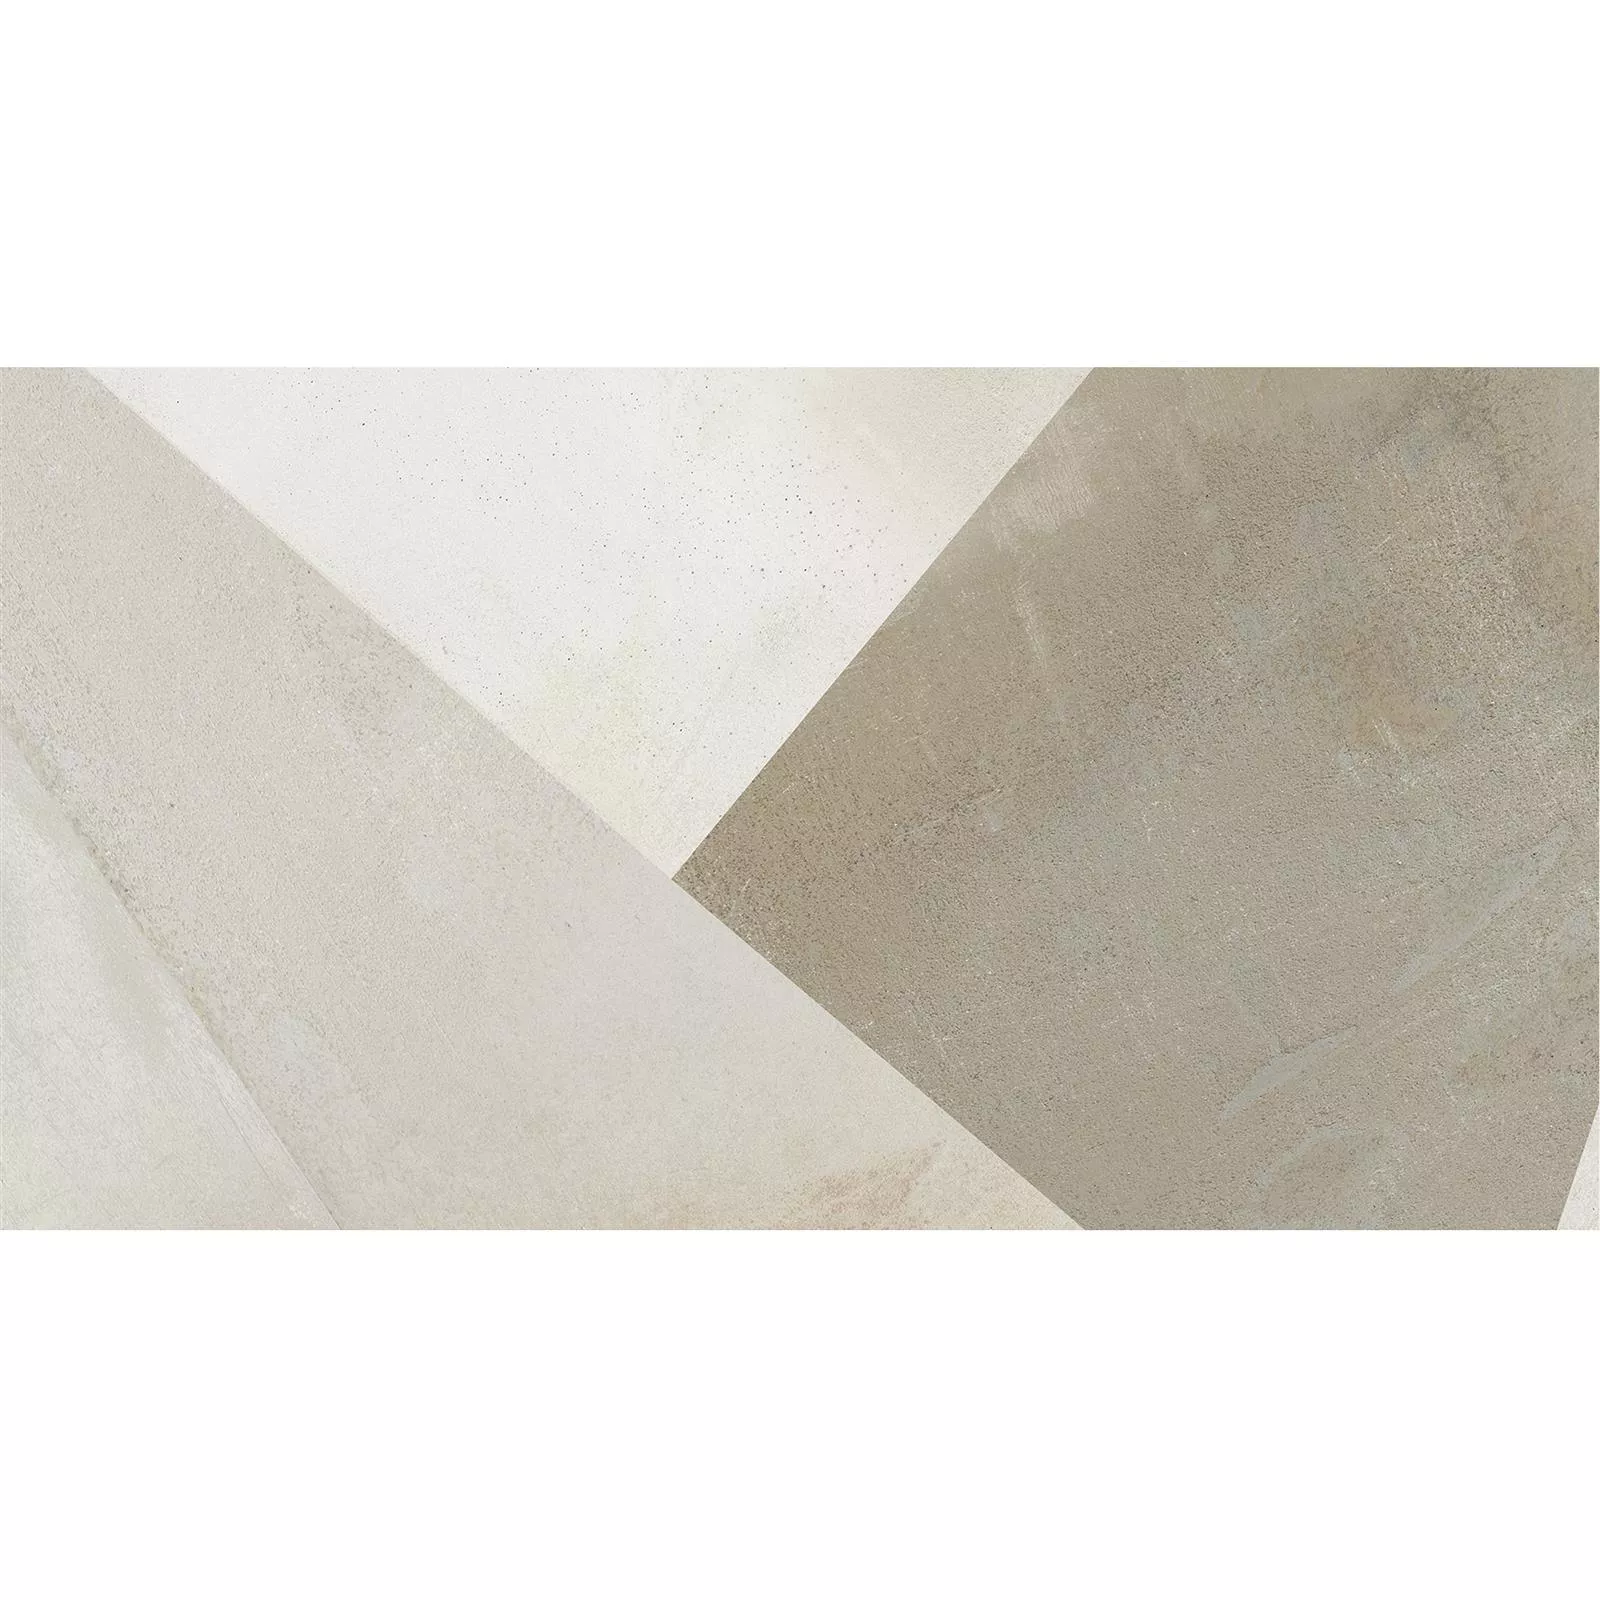 Wall Tiles Queens Rectified Sand Decor 2 30x60cm